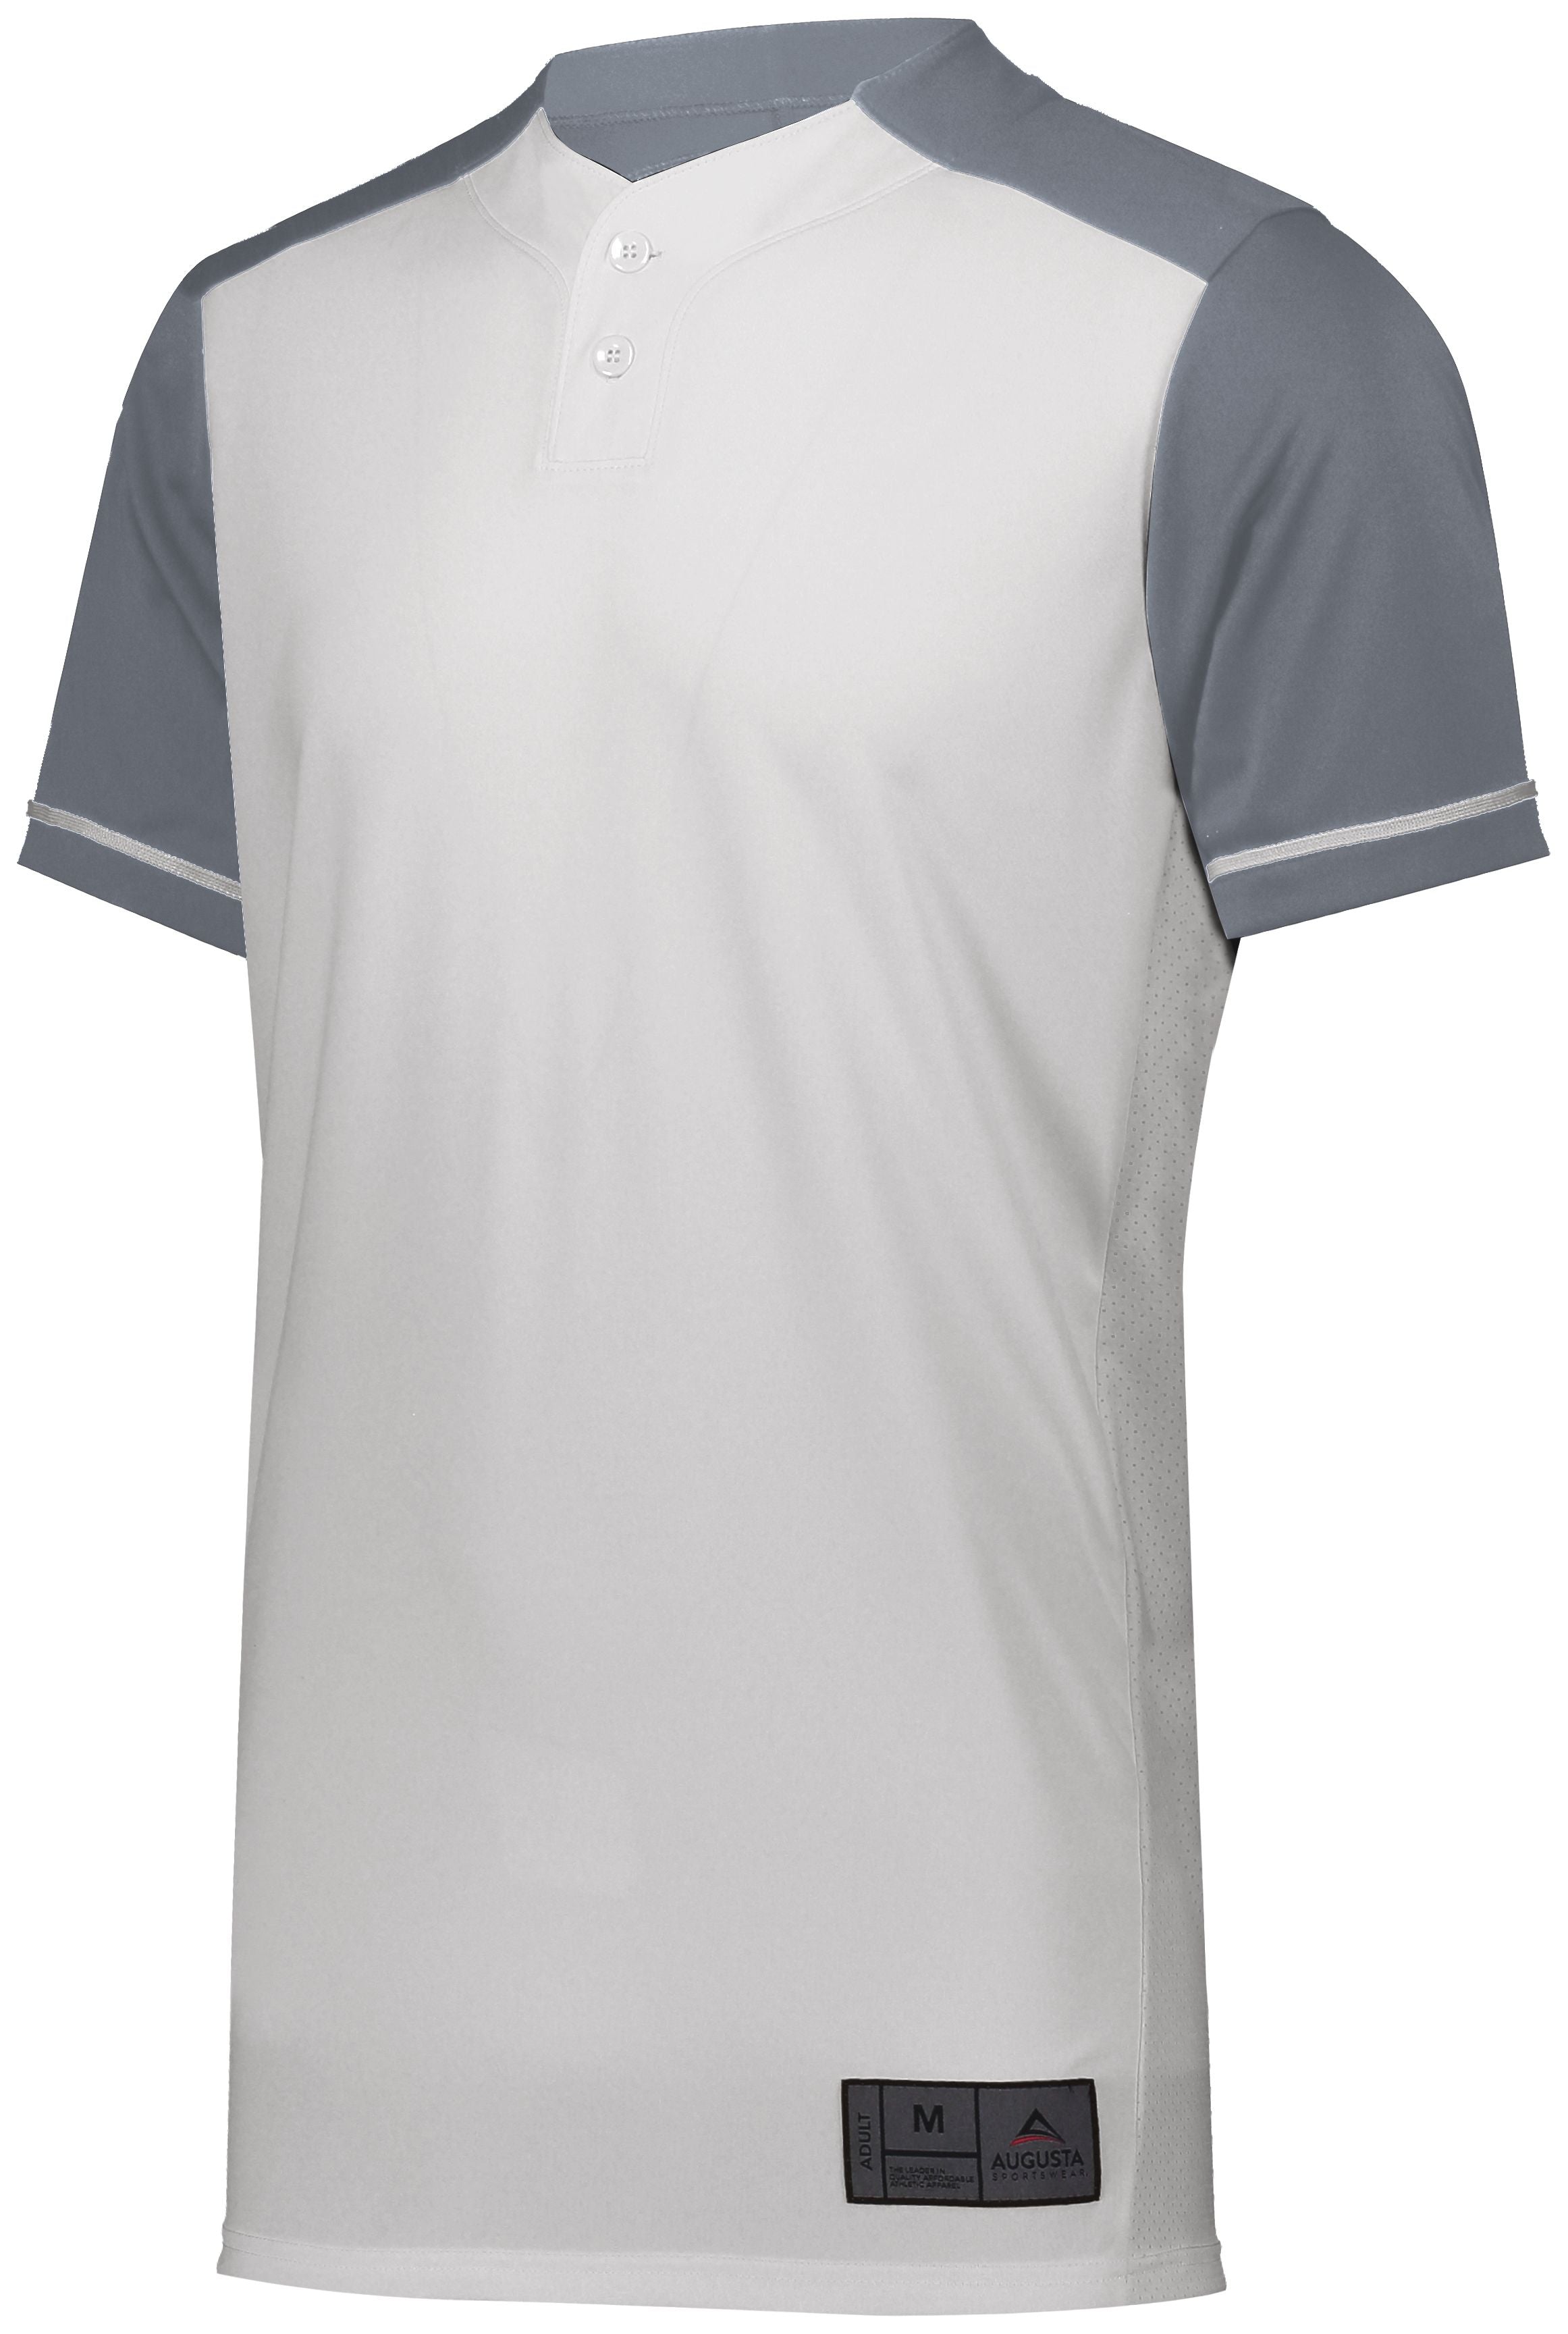 Augusta Sportswear Closer Jersey in White/Graphite  -Part of the Adult, Adult-Jersey, Augusta-Products, Baseball, Shirts, All-Sports, All-Sports-1 product lines at KanaleyCreations.com